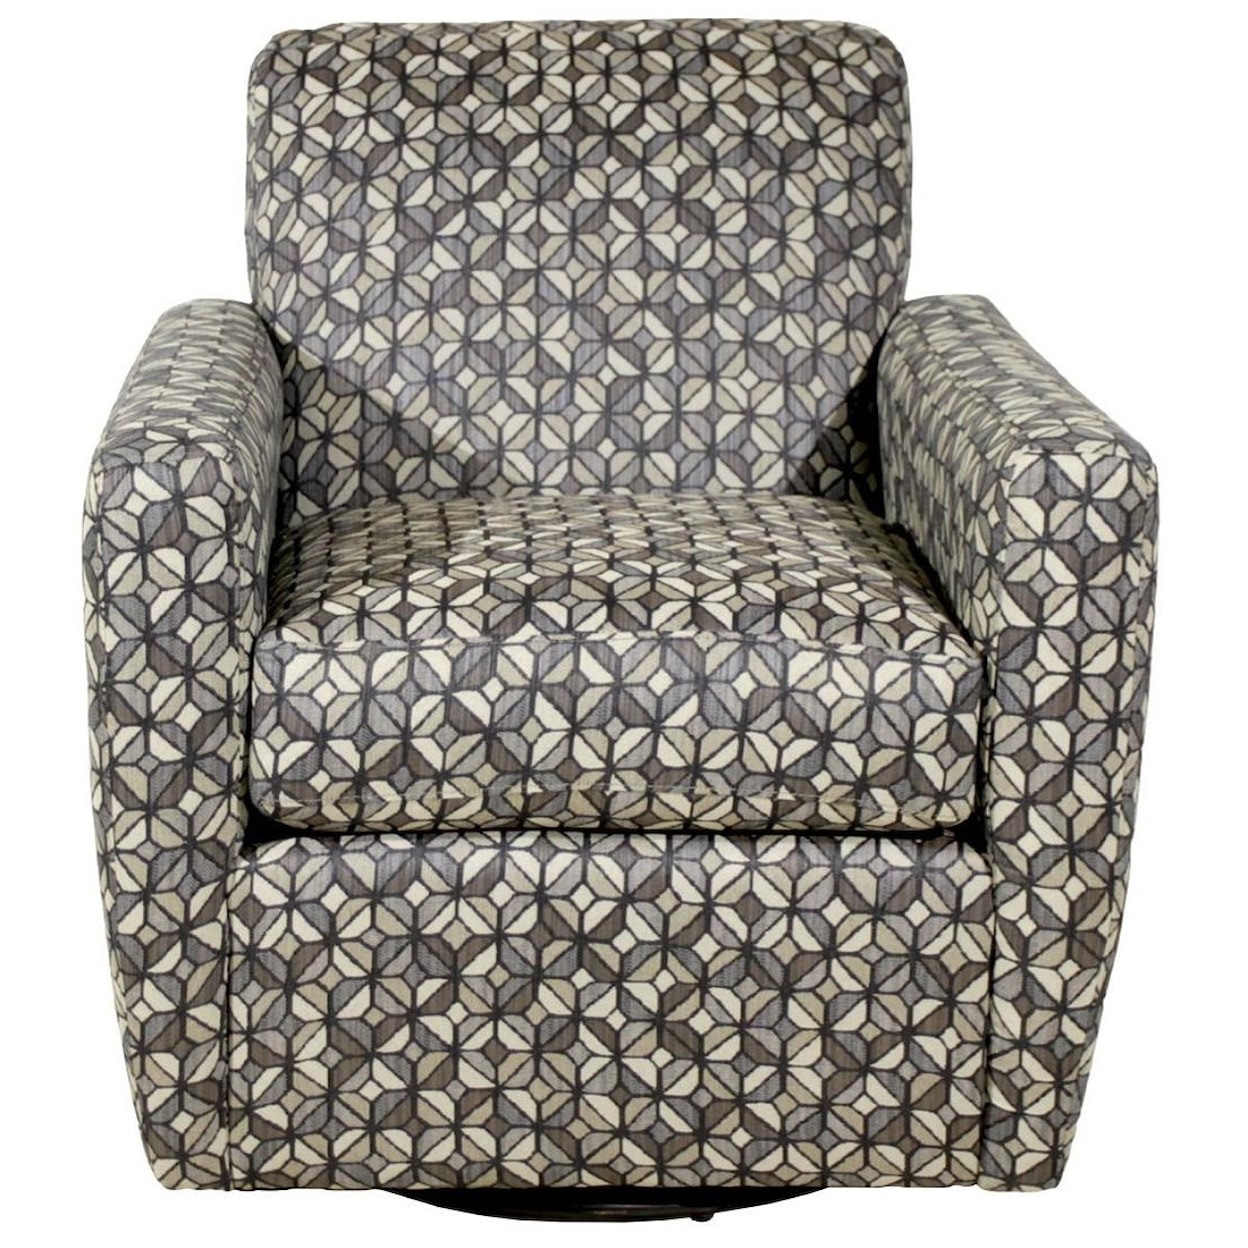 Jonathan Louis Vancouver Contemporary Swivel Chair